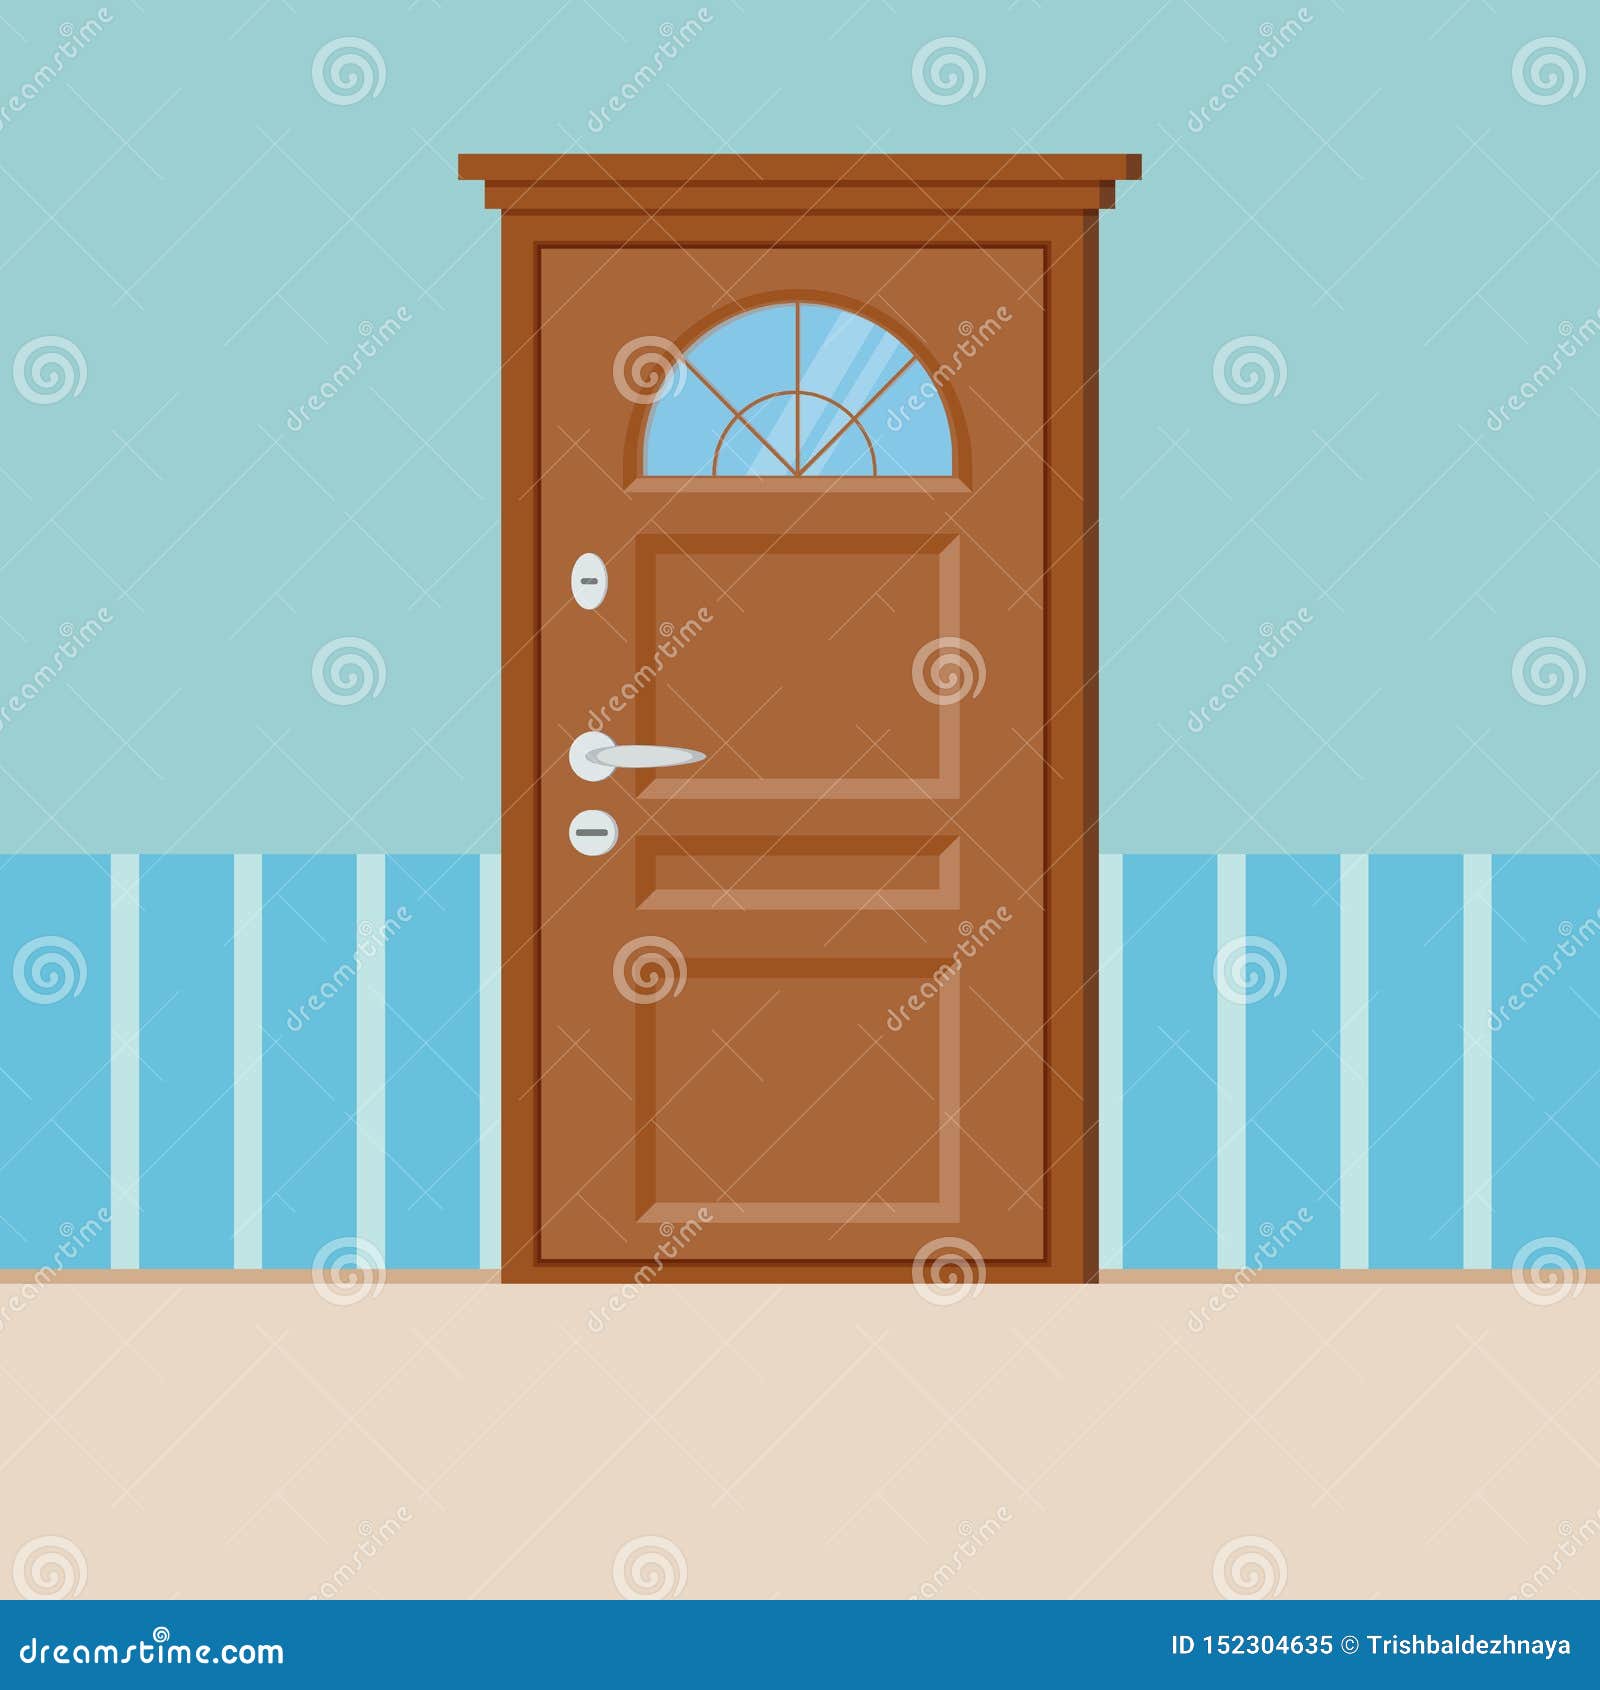 Wooden Closed Door With Frame Isolated On Wall Stock Vector